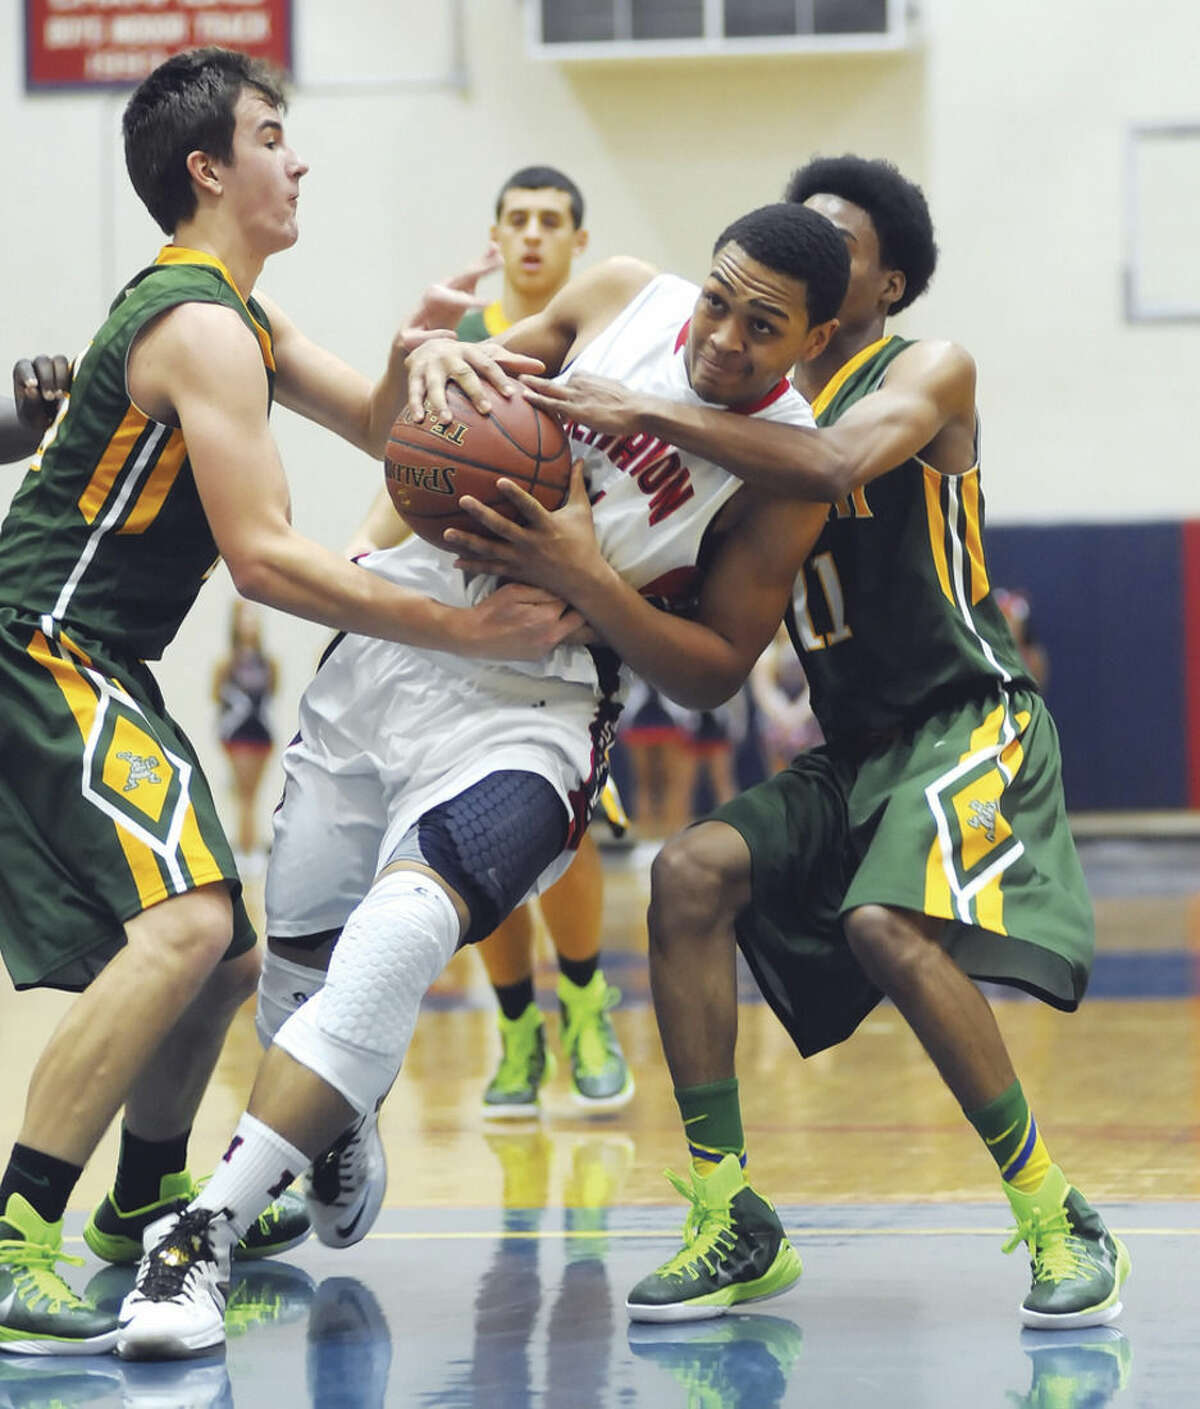 Hour photo/John Nash Brien McMahon's Timmy Hinton Jr., center, is fouled by either one or two Trinity Catholic players during the first quarter of Friday's game at King-Kehoe Gym in Norwalk.